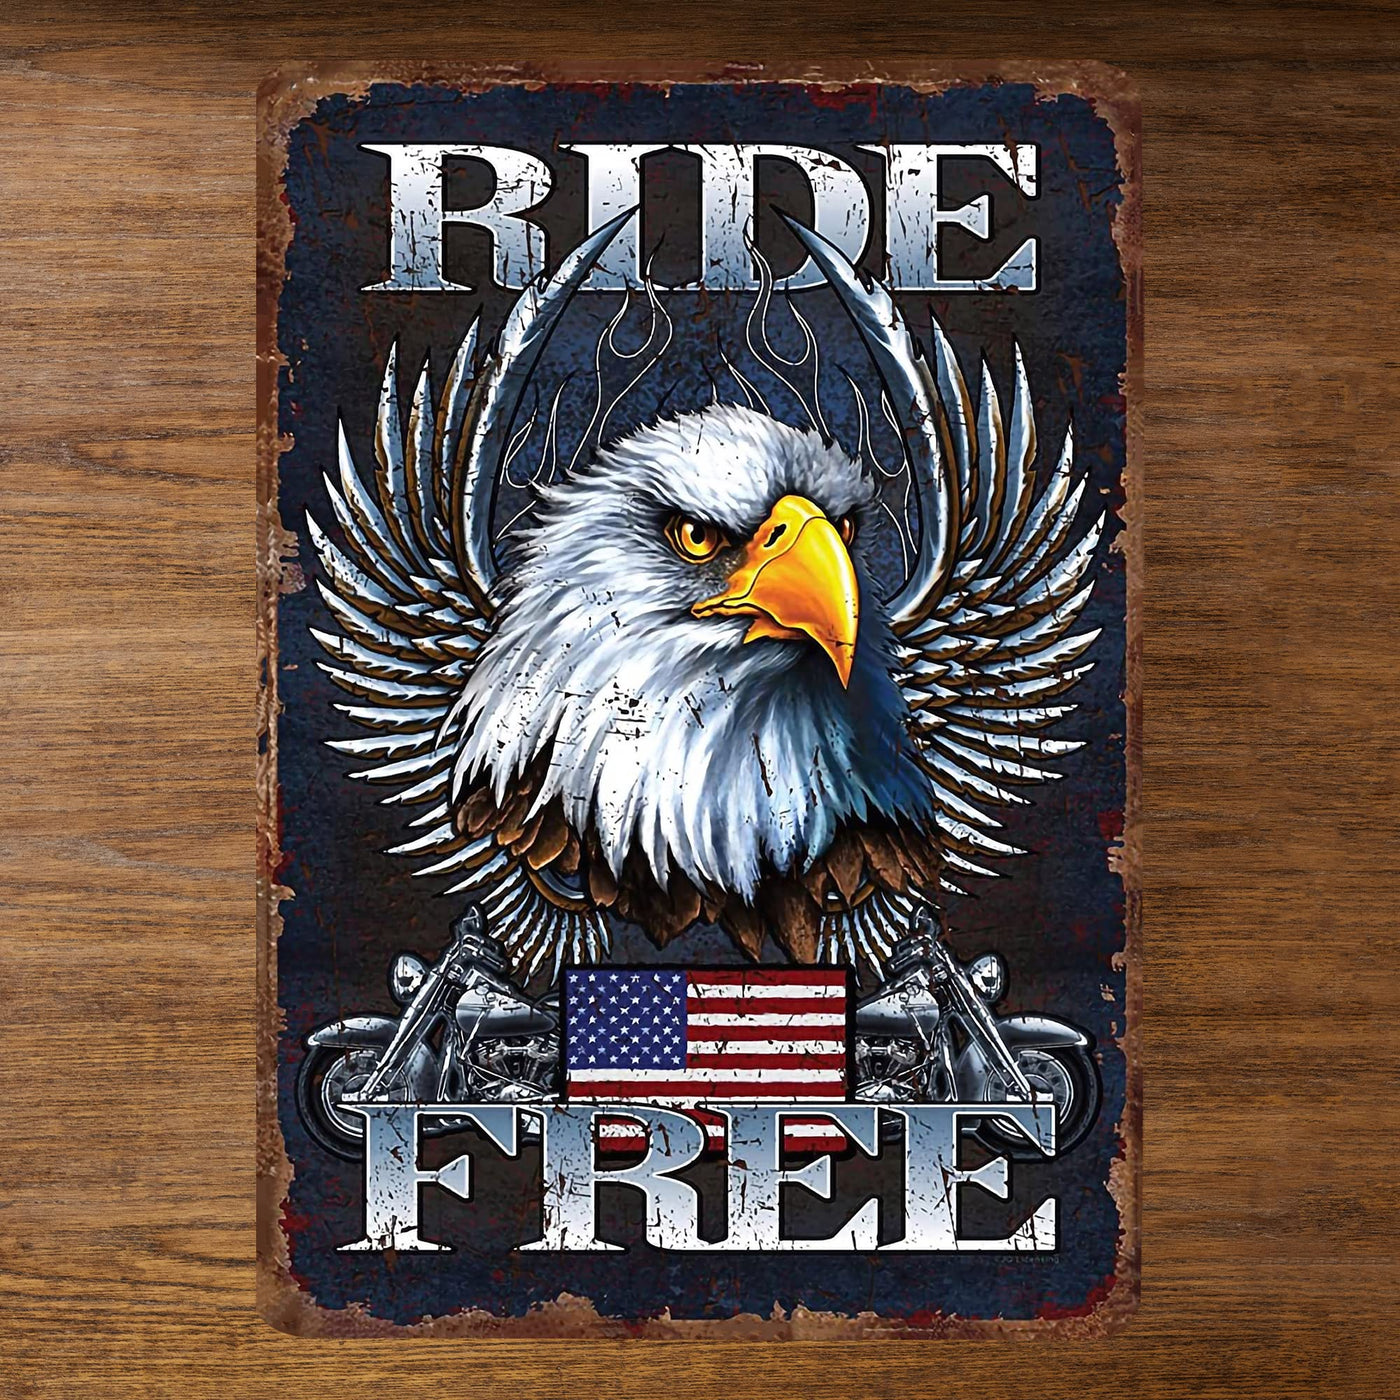 Ride Free Metal Wall Art Vintage Motorcycle Sign -8 x 12 Inch Rustic Patriotic American Eagle Garage Sign for Bar, Man Cave, Shop - Retro Tin Biker Sign -Great Gift for Home, Outdoor Decor!